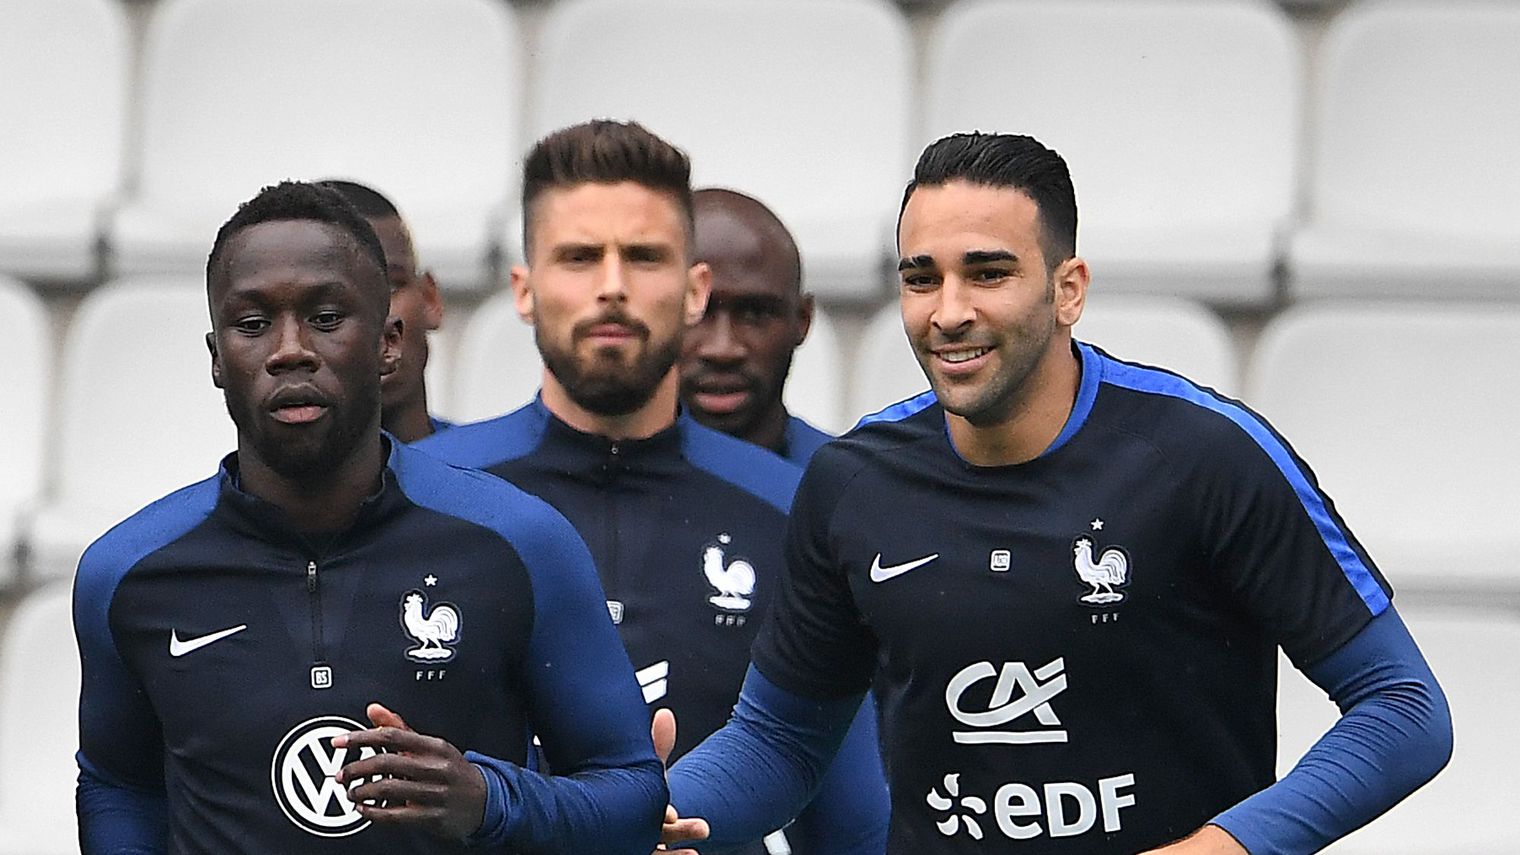 Rami with the French national team